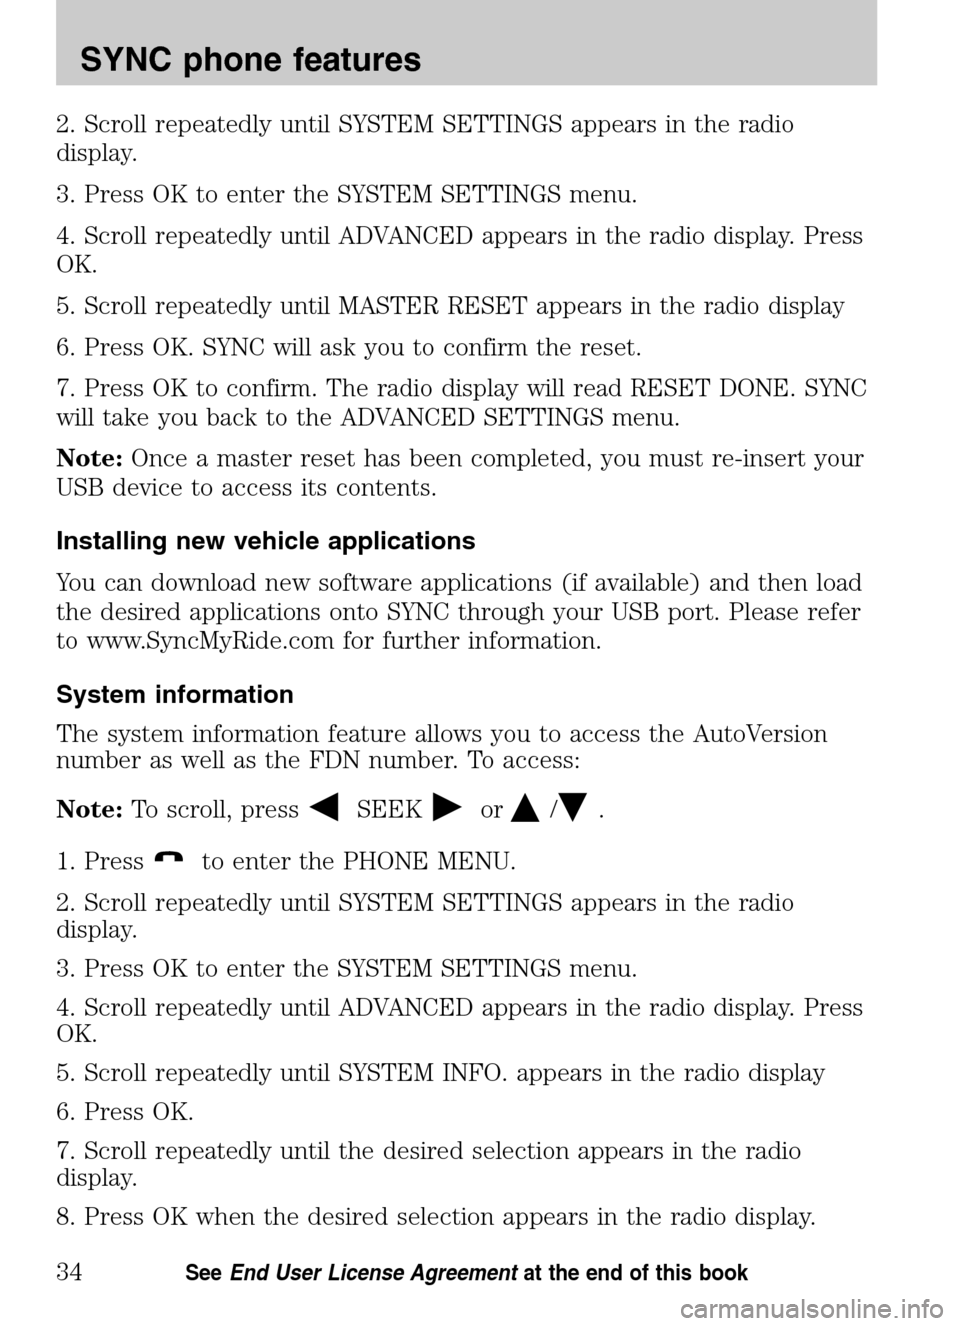 Mercury Mariner 2009  SYNC Supplement  2. Scroll repeatedly until SYSTEM SETTINGS appears in the radio 
display. 
3. Press OK to enter the SYSTEM SETTINGS menu.
4. Scroll repeatedly until ADVANCED appears in the radio display. Press 
OK. 
